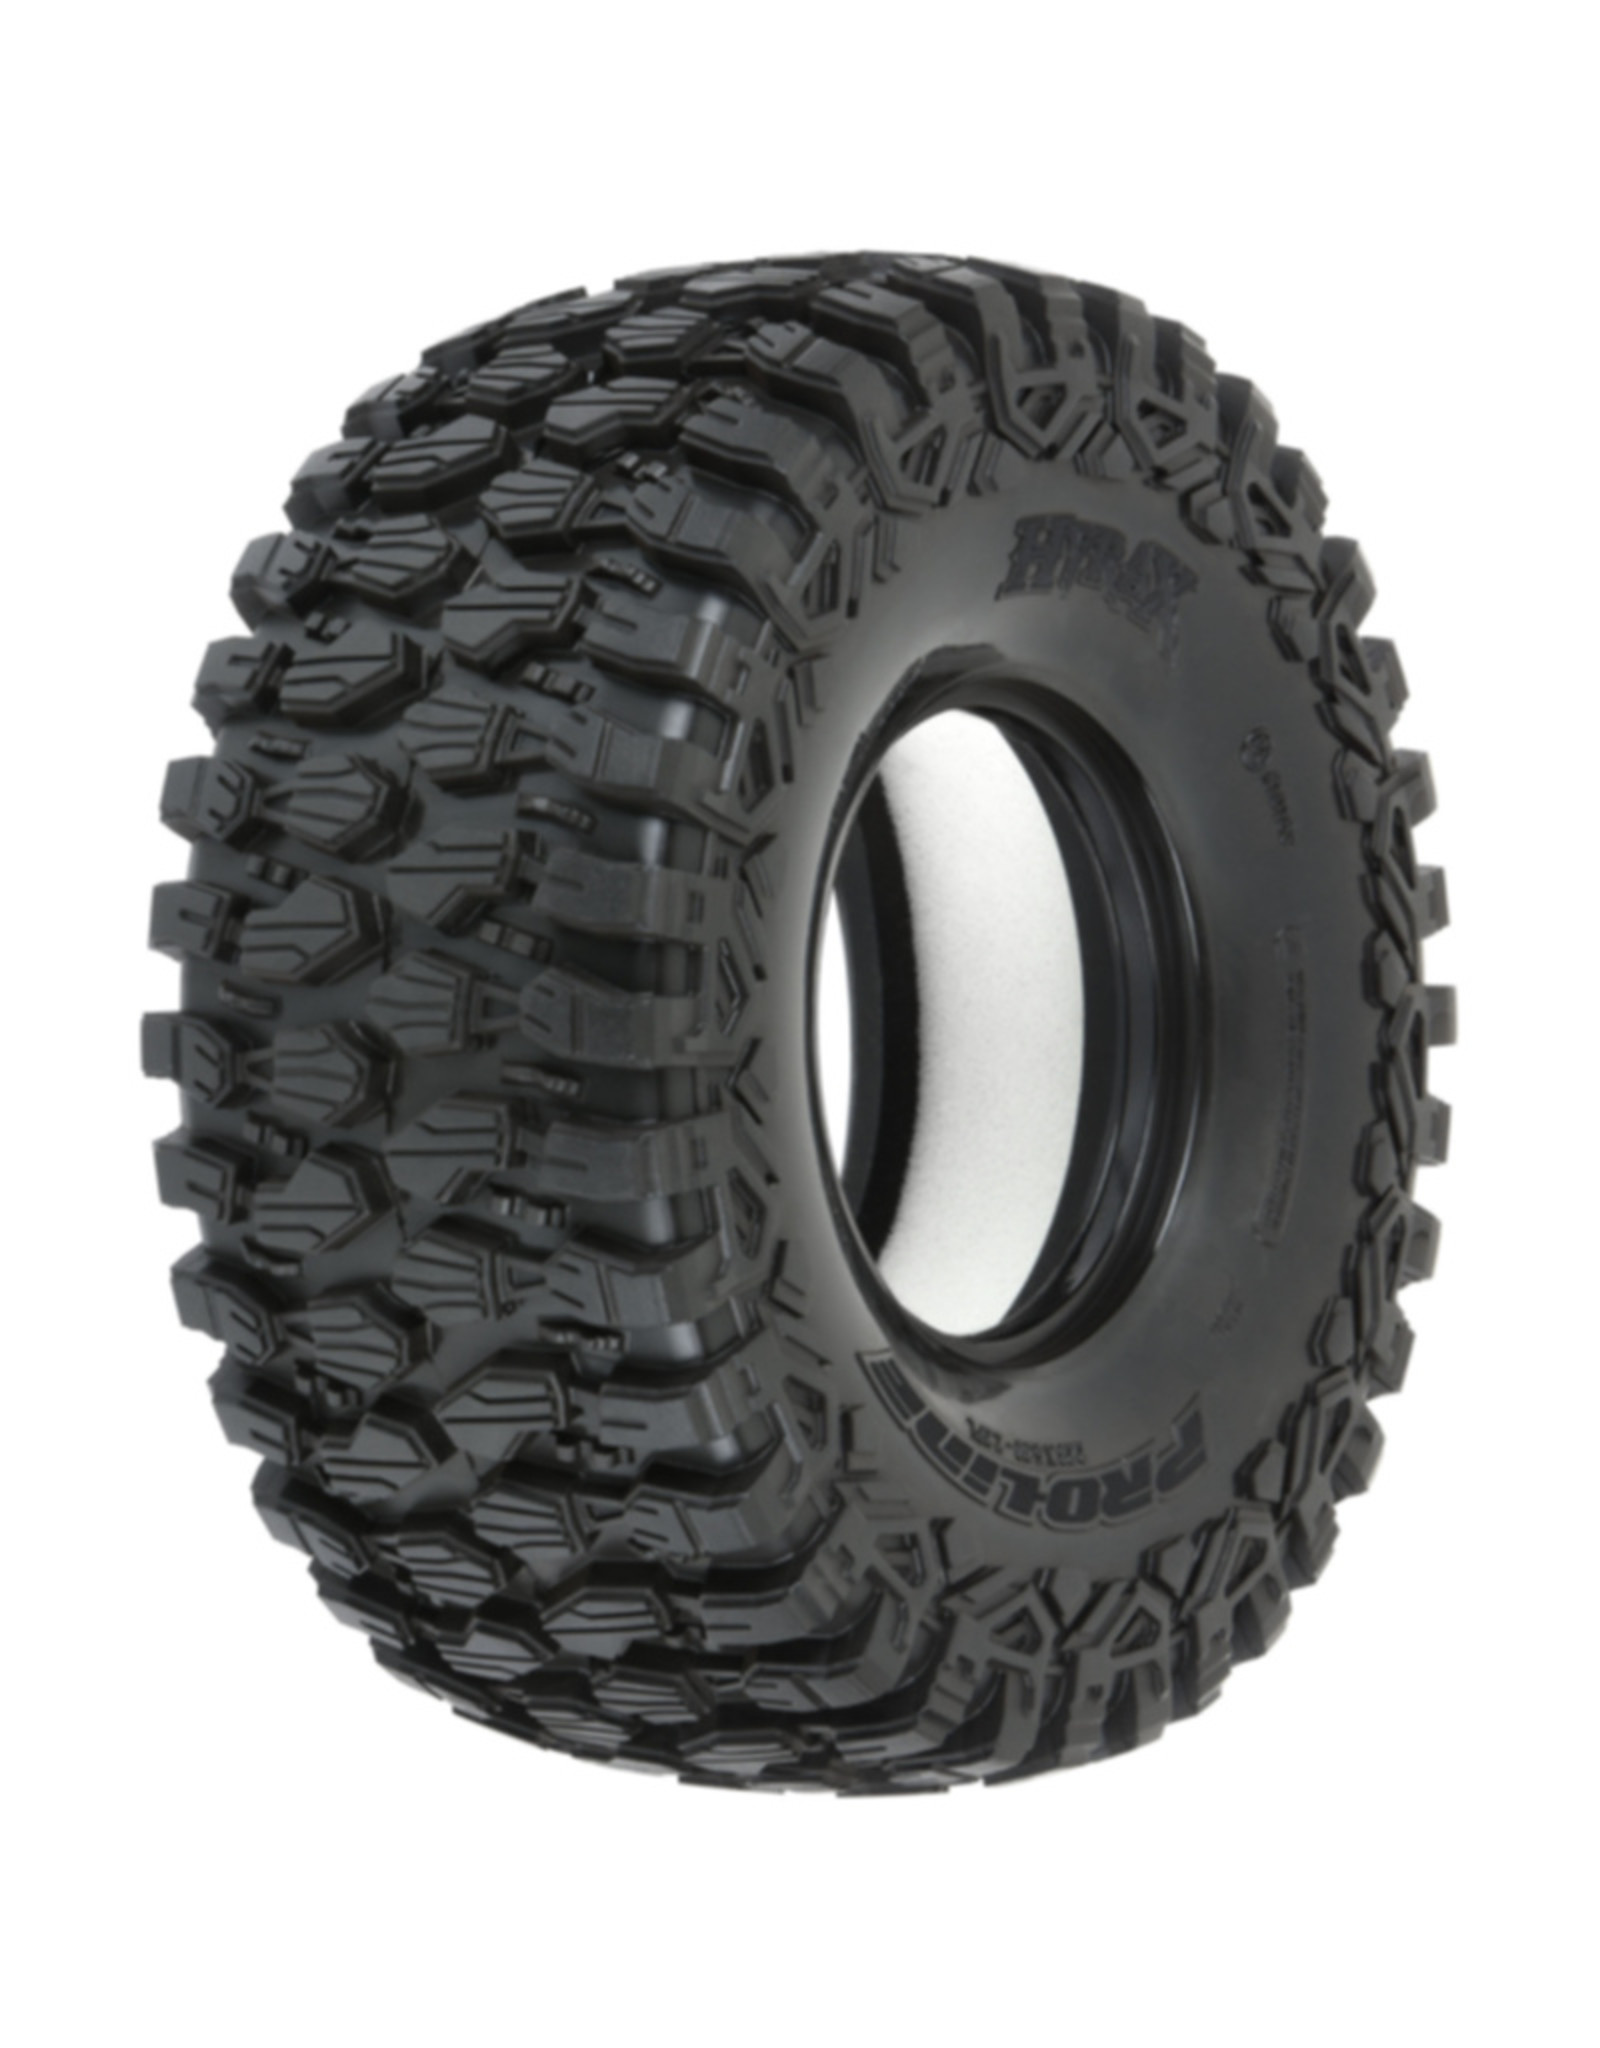 Pro-Line Racing PRO1016300 Hyrax Tires for Unlimited Desert Racer F/R